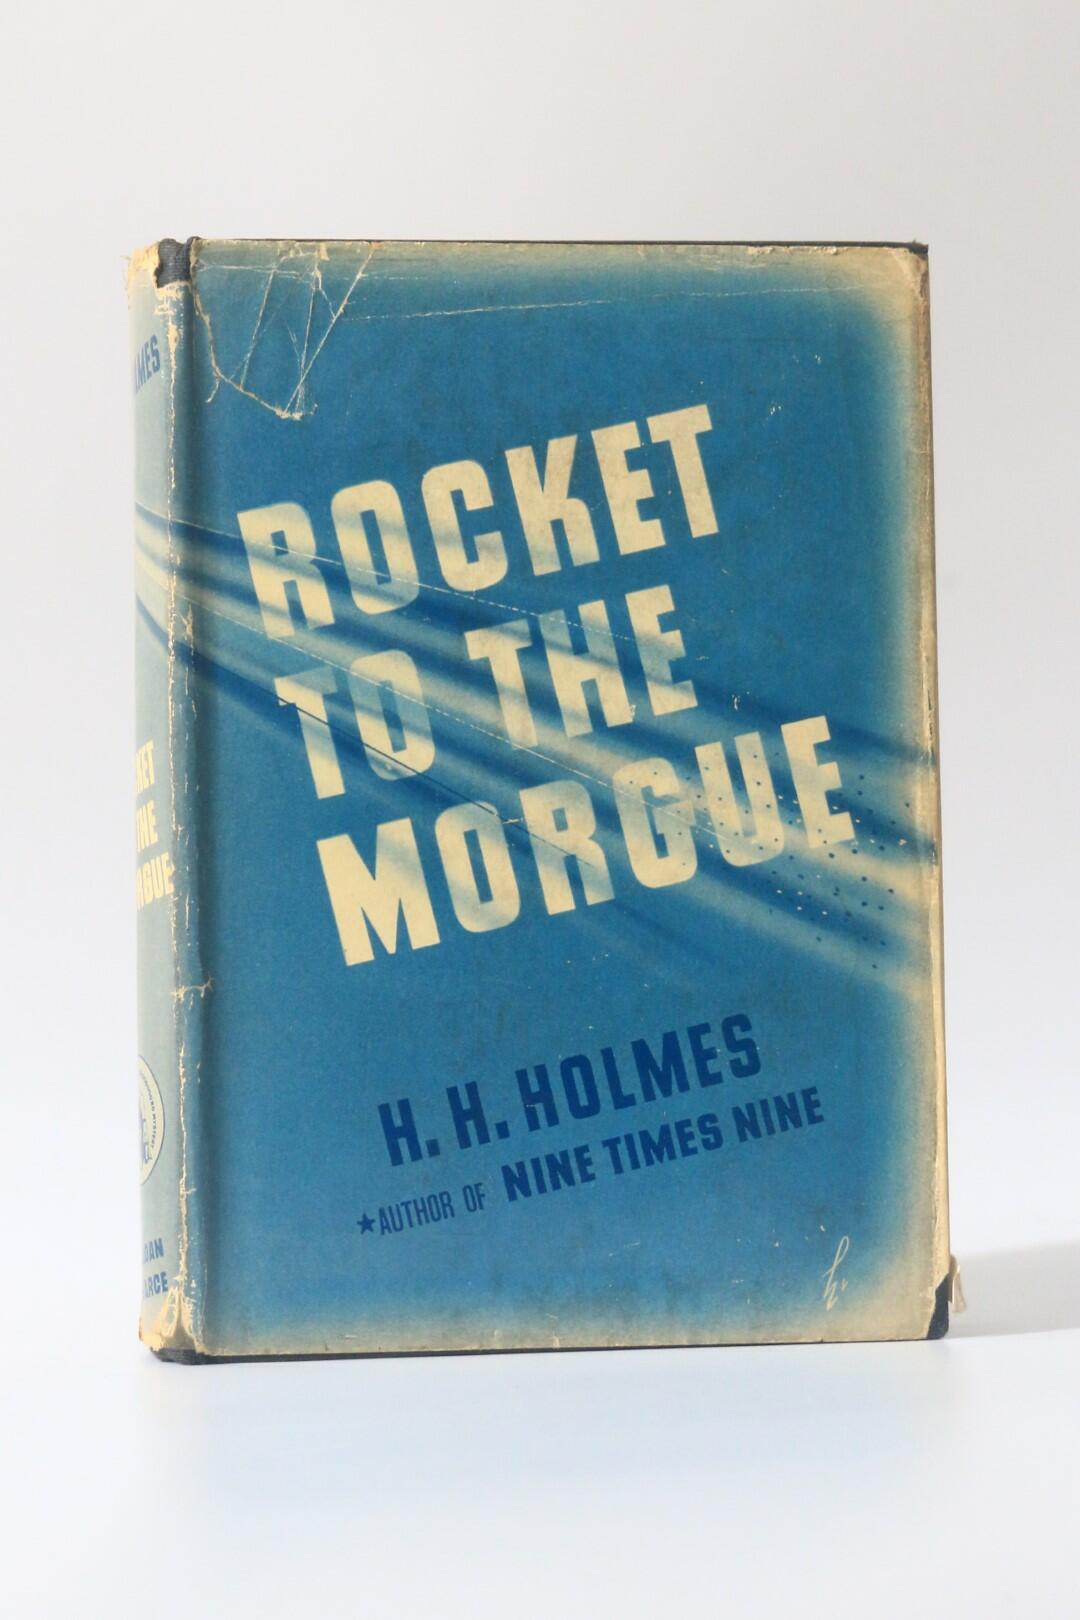 H.H. Holmes [Anthony Boucher] - Rocket to the Morgue - Duell, Sloan and Pearce, 1942, First Edition.